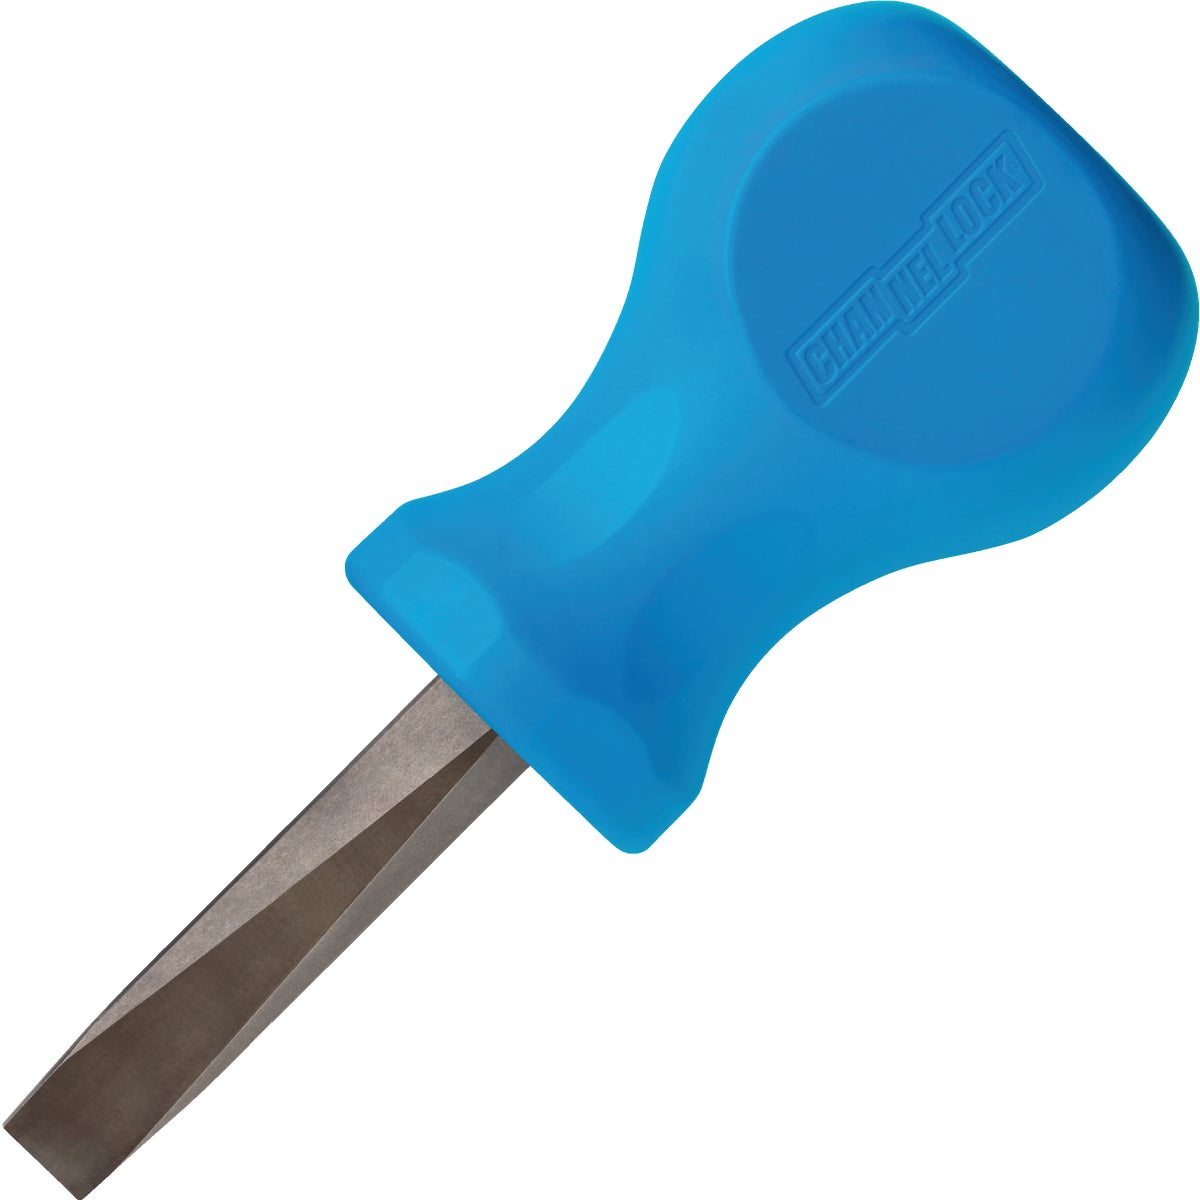 Channellock 1/4 In. x 1-1/2 In. Professional Slotted Screwdriver